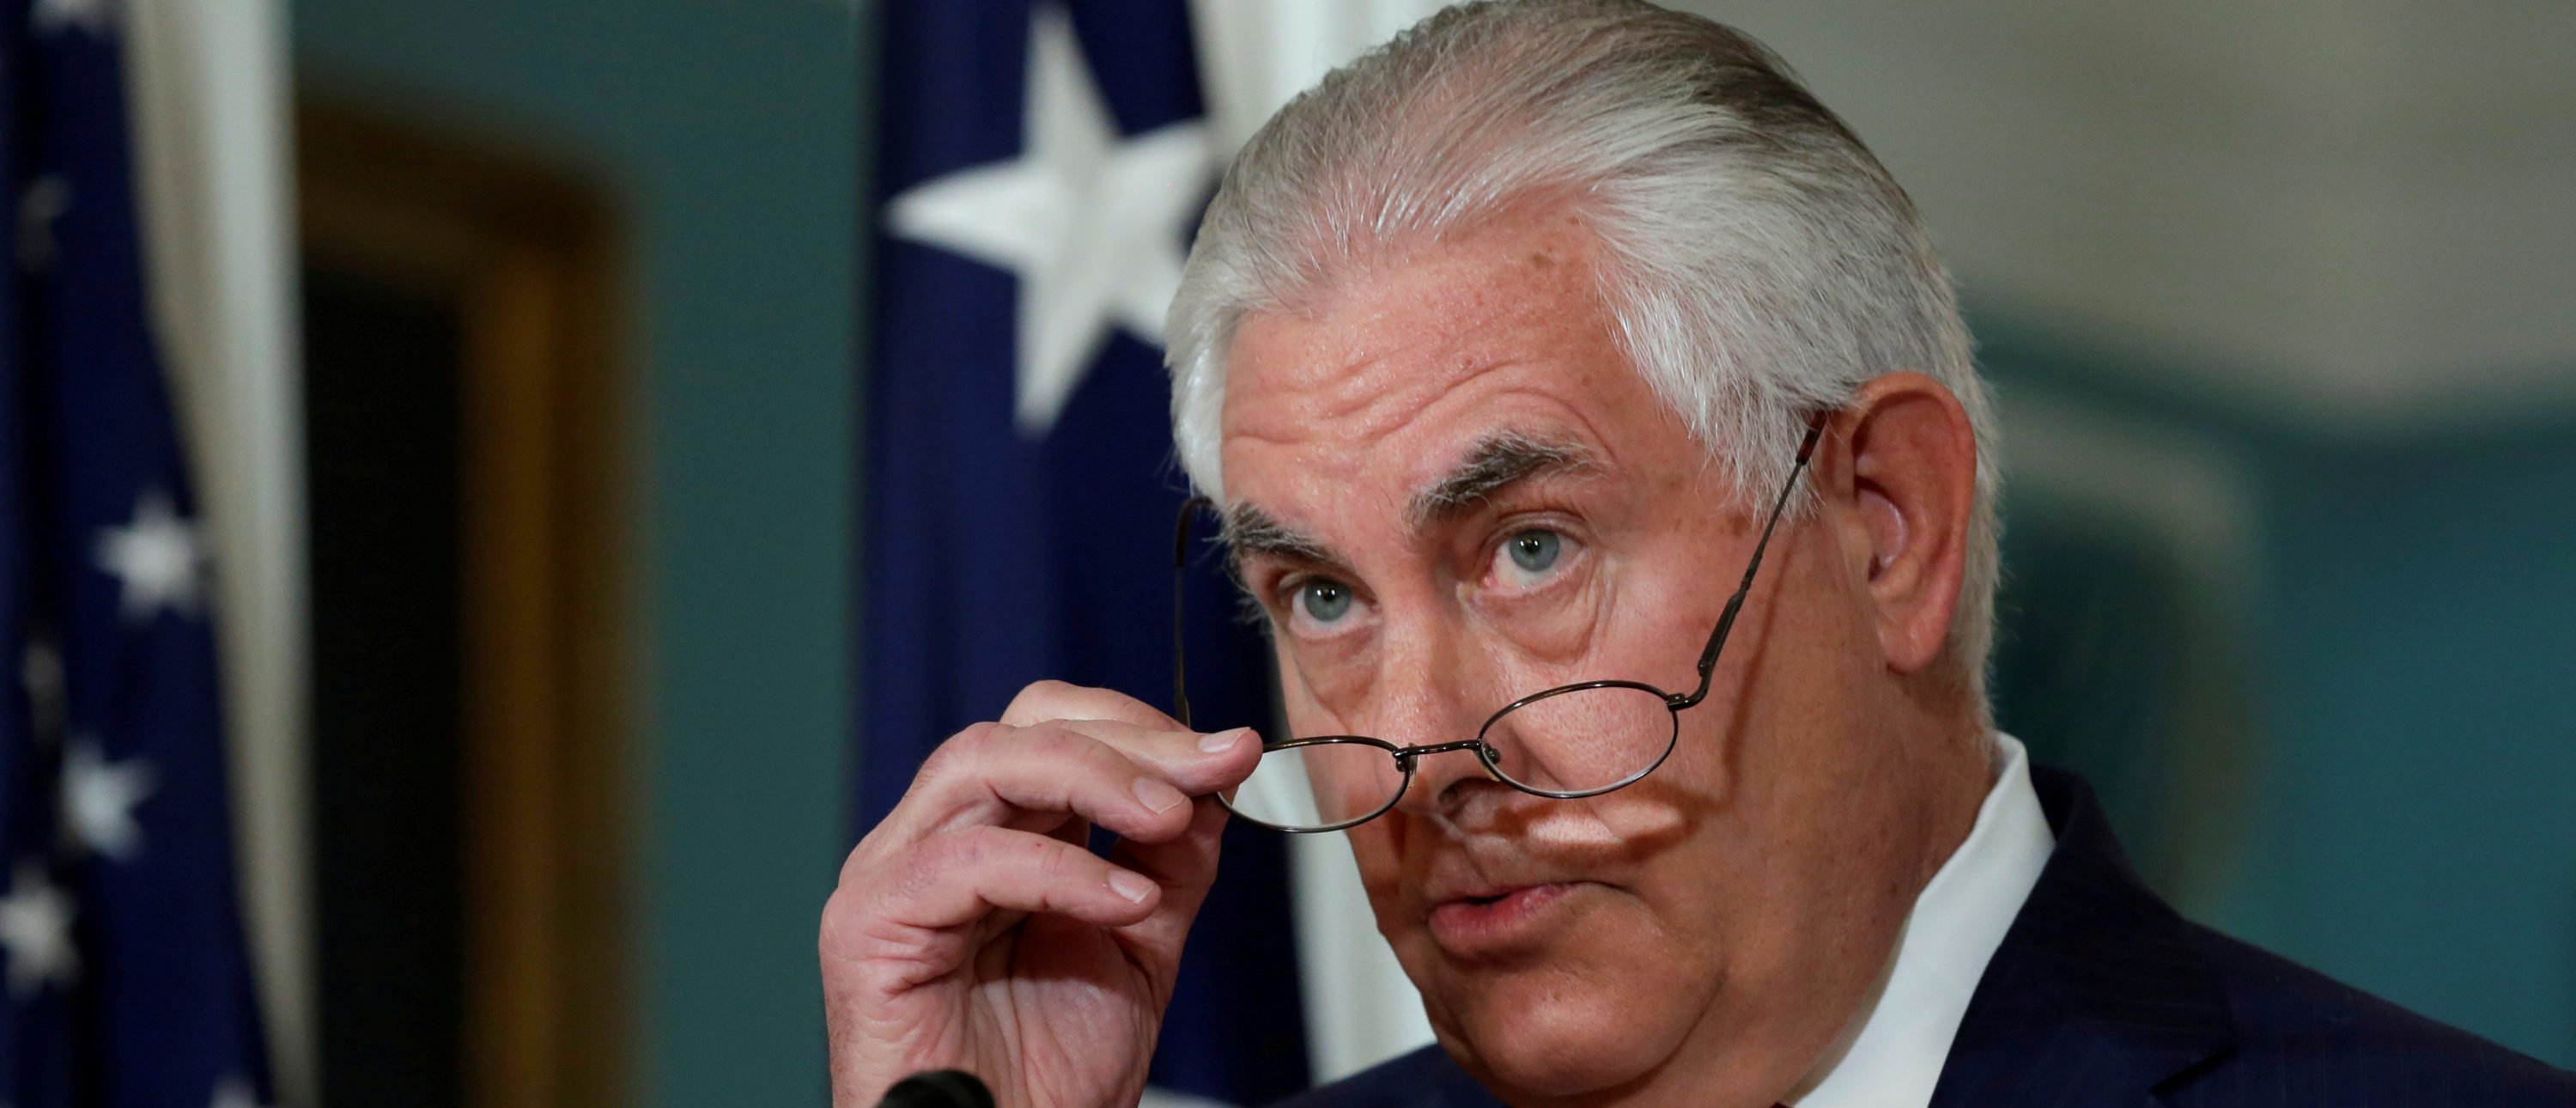 U.S. Secretary of State Rex Tillerson makes a statement to the media that he is not going to resign, at the State Department in Washington, U.S., October 4, 2017. (REUTERS/Yuri Gripas)